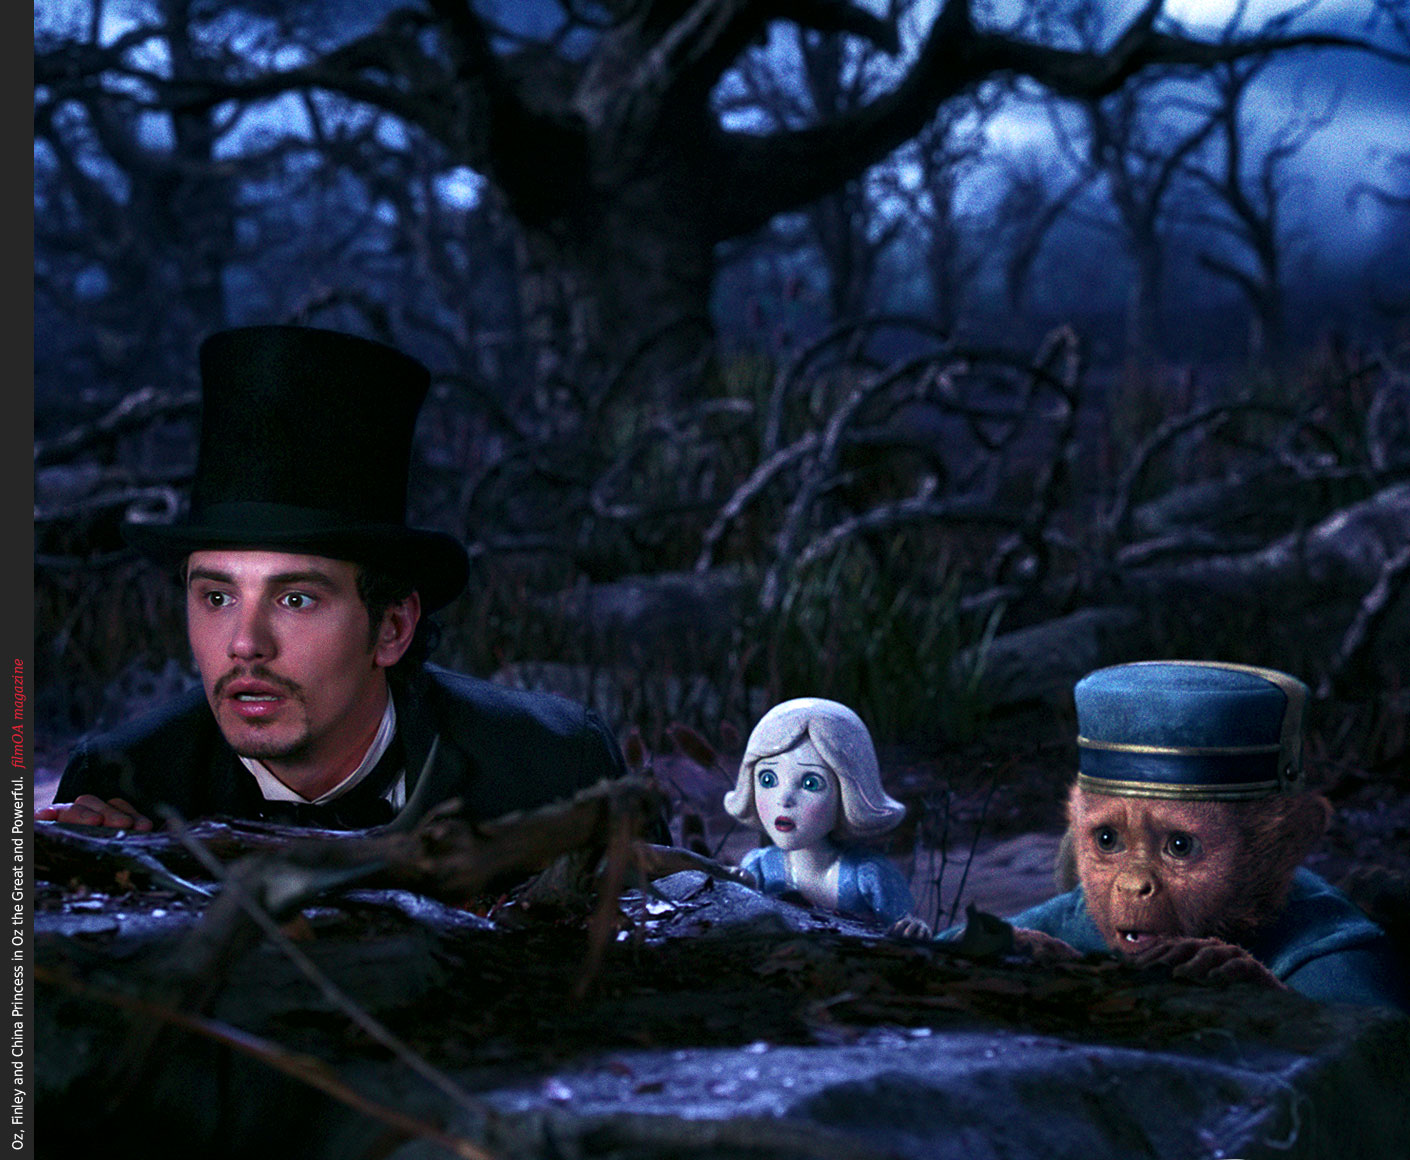 Oz, Finley and China Princess in Oz the Great and Powerful